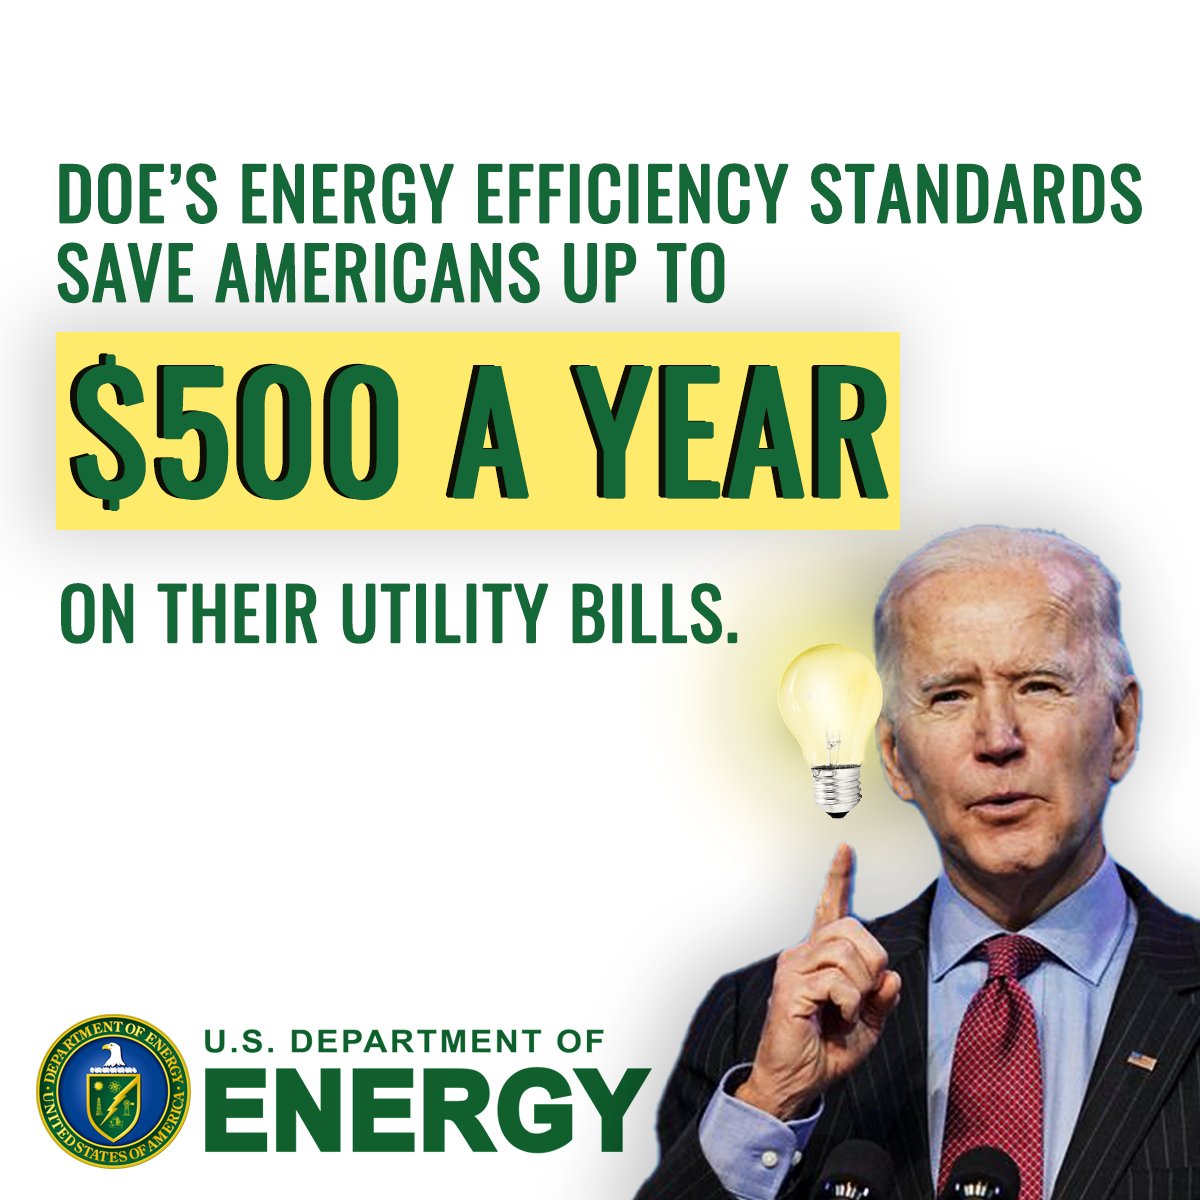 Energy efficiency standards save American families money. The Biden Admin has taken action that will collectively save Americans an additional $1 TRILLION over the next 30 years. But House Republicans are looking to gut these standards – driving up costs for American families.